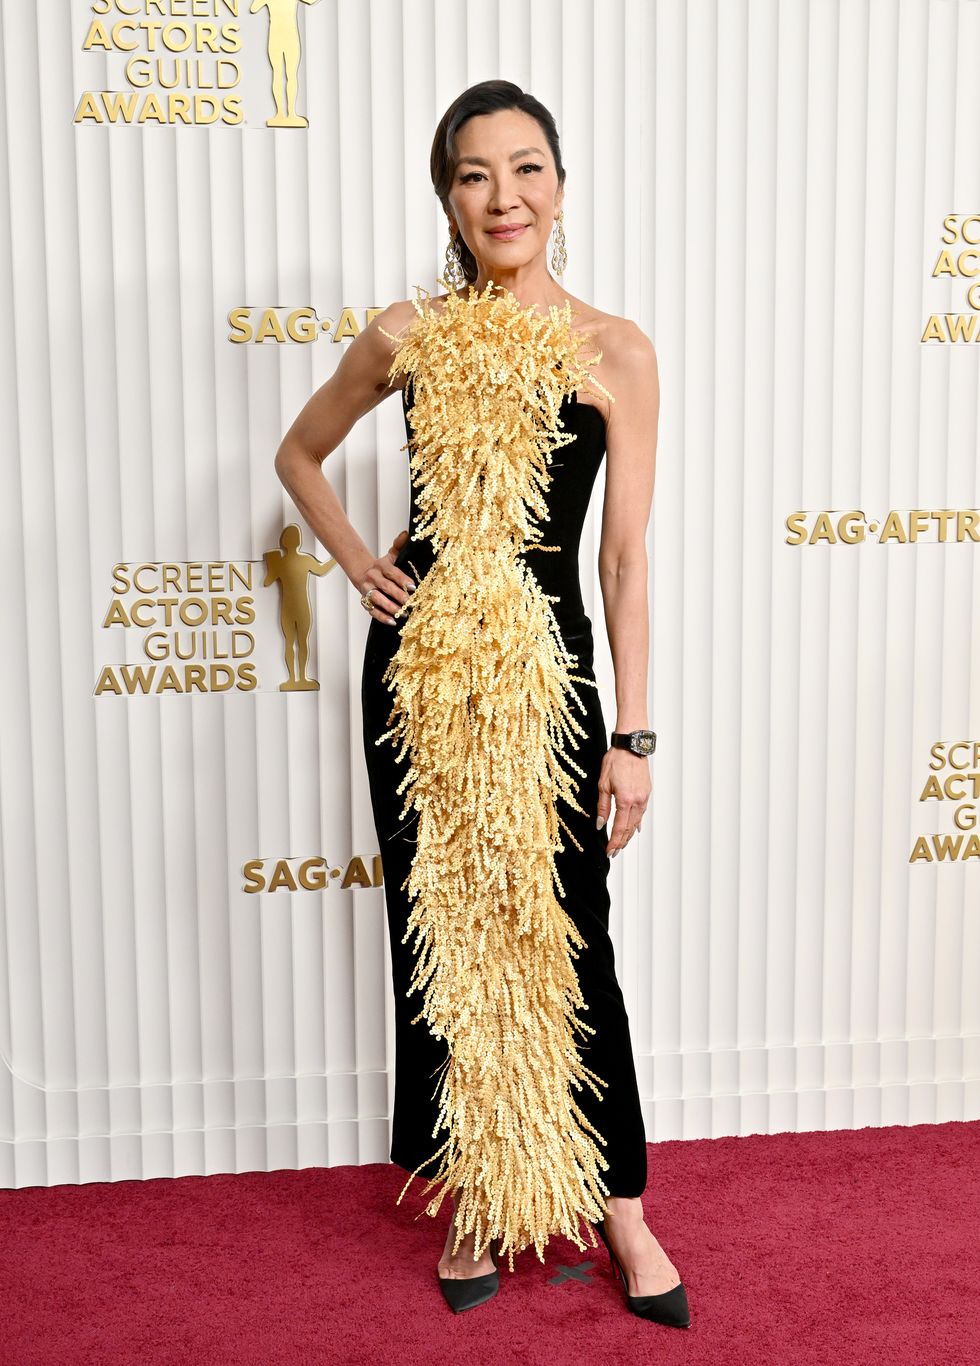 los angeles, california february 26 michelle yeoh attends the 29th annual screen actors guild awards at fairmont century plaza on february 26, 2023 in los angeles, california photo by axellebauer griffinfilmmagic